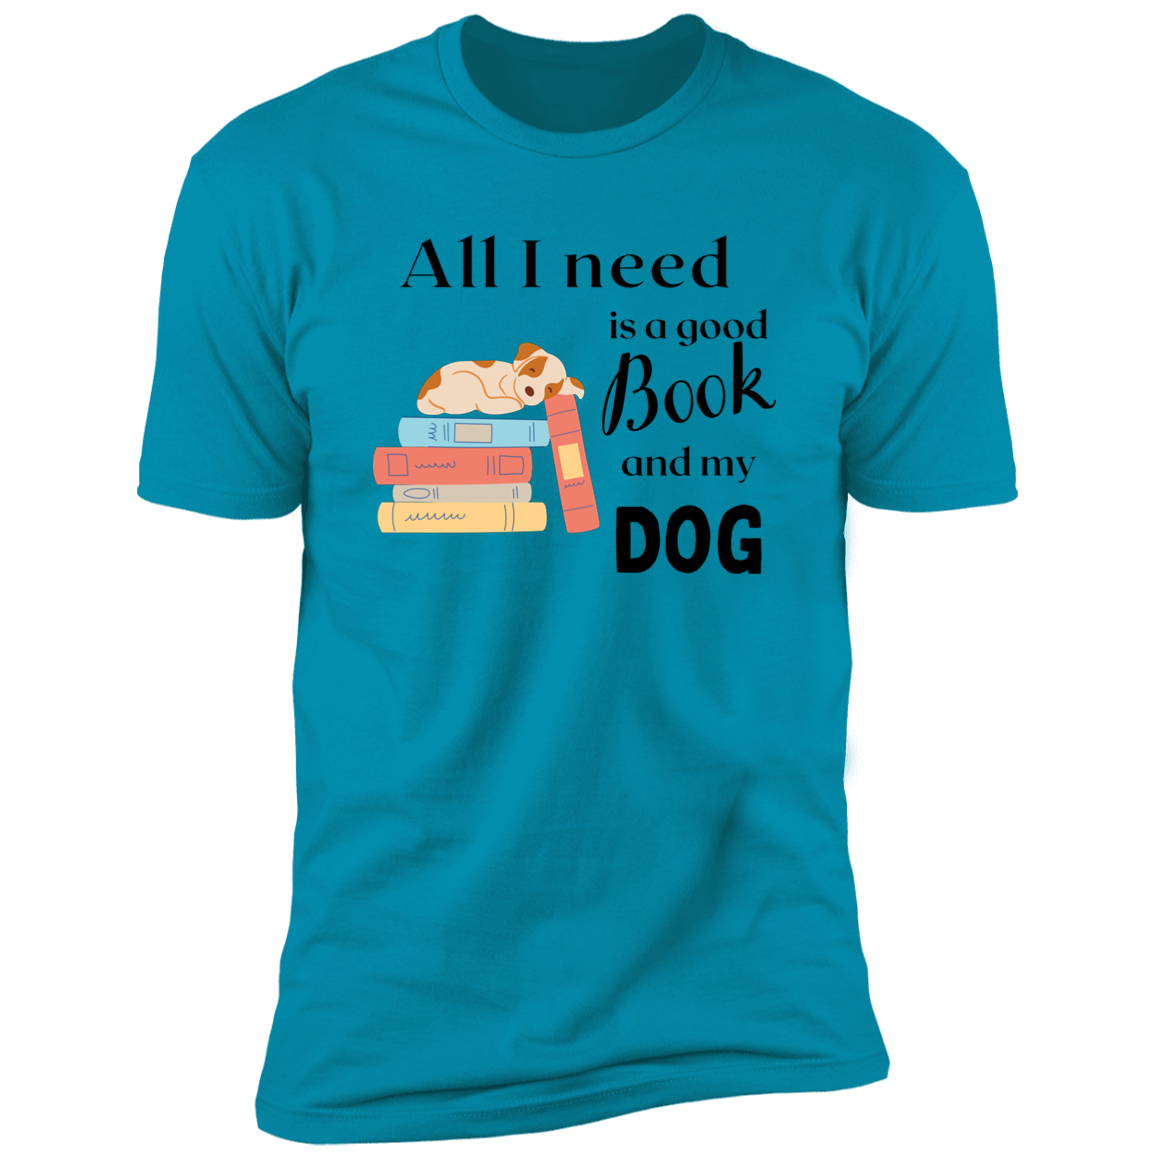 All I Need is a Good Book and My Dog, dog t-shirt for humans, in turquoise 